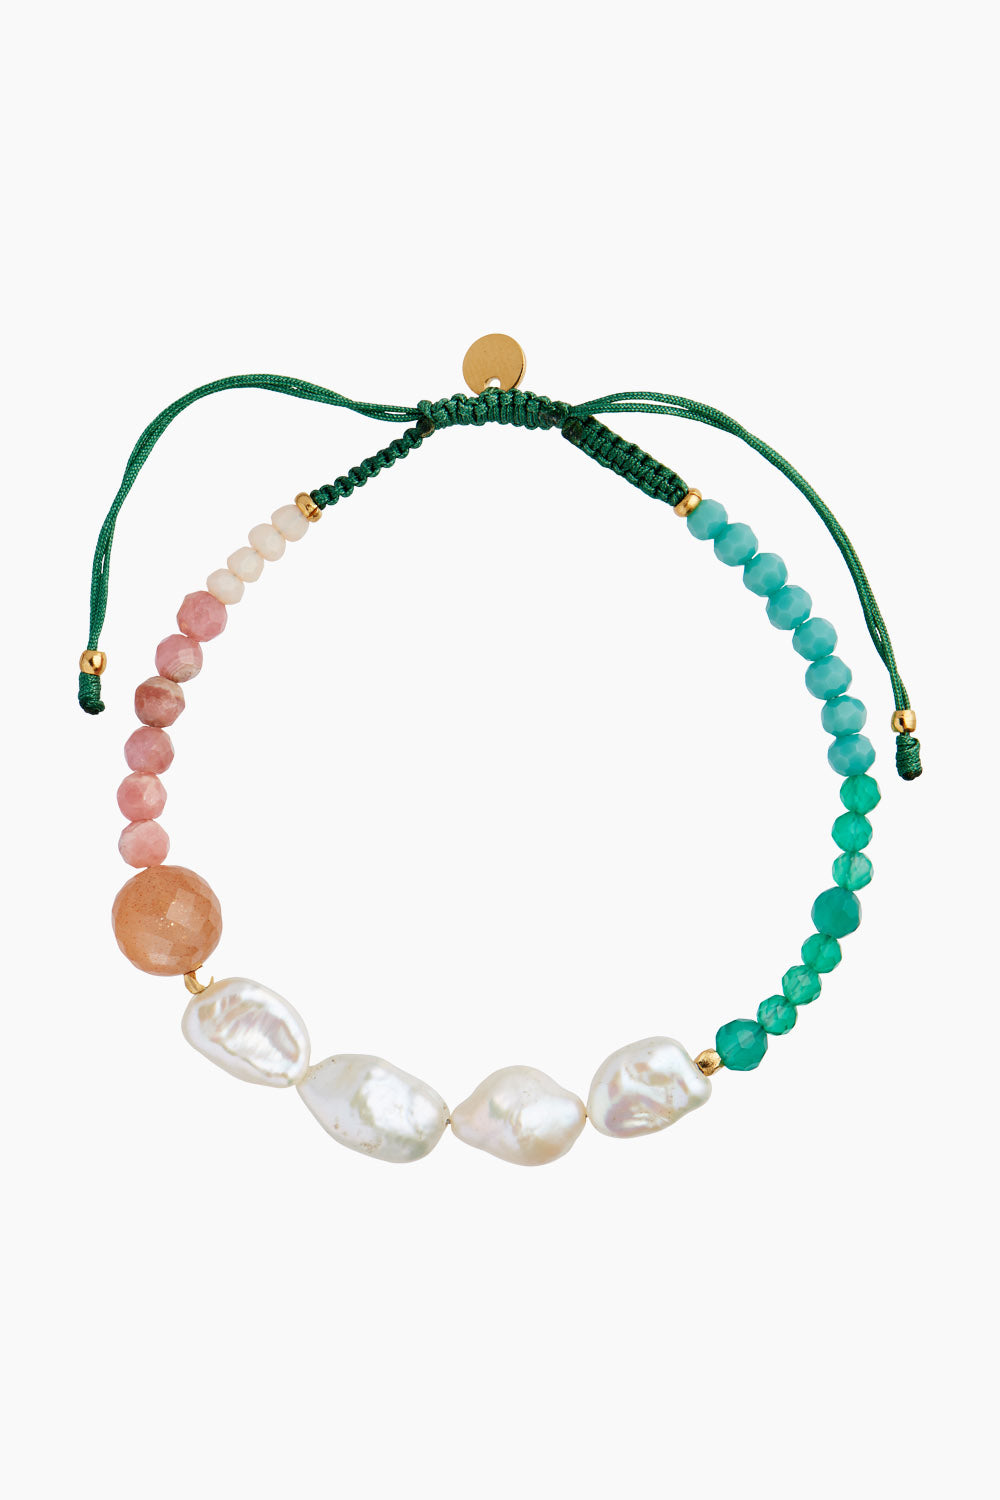 9: Powder Fall Bracelet With Stones And Pearls And Pine Green Ribbon - Multi - Stine A - Grøn One Size